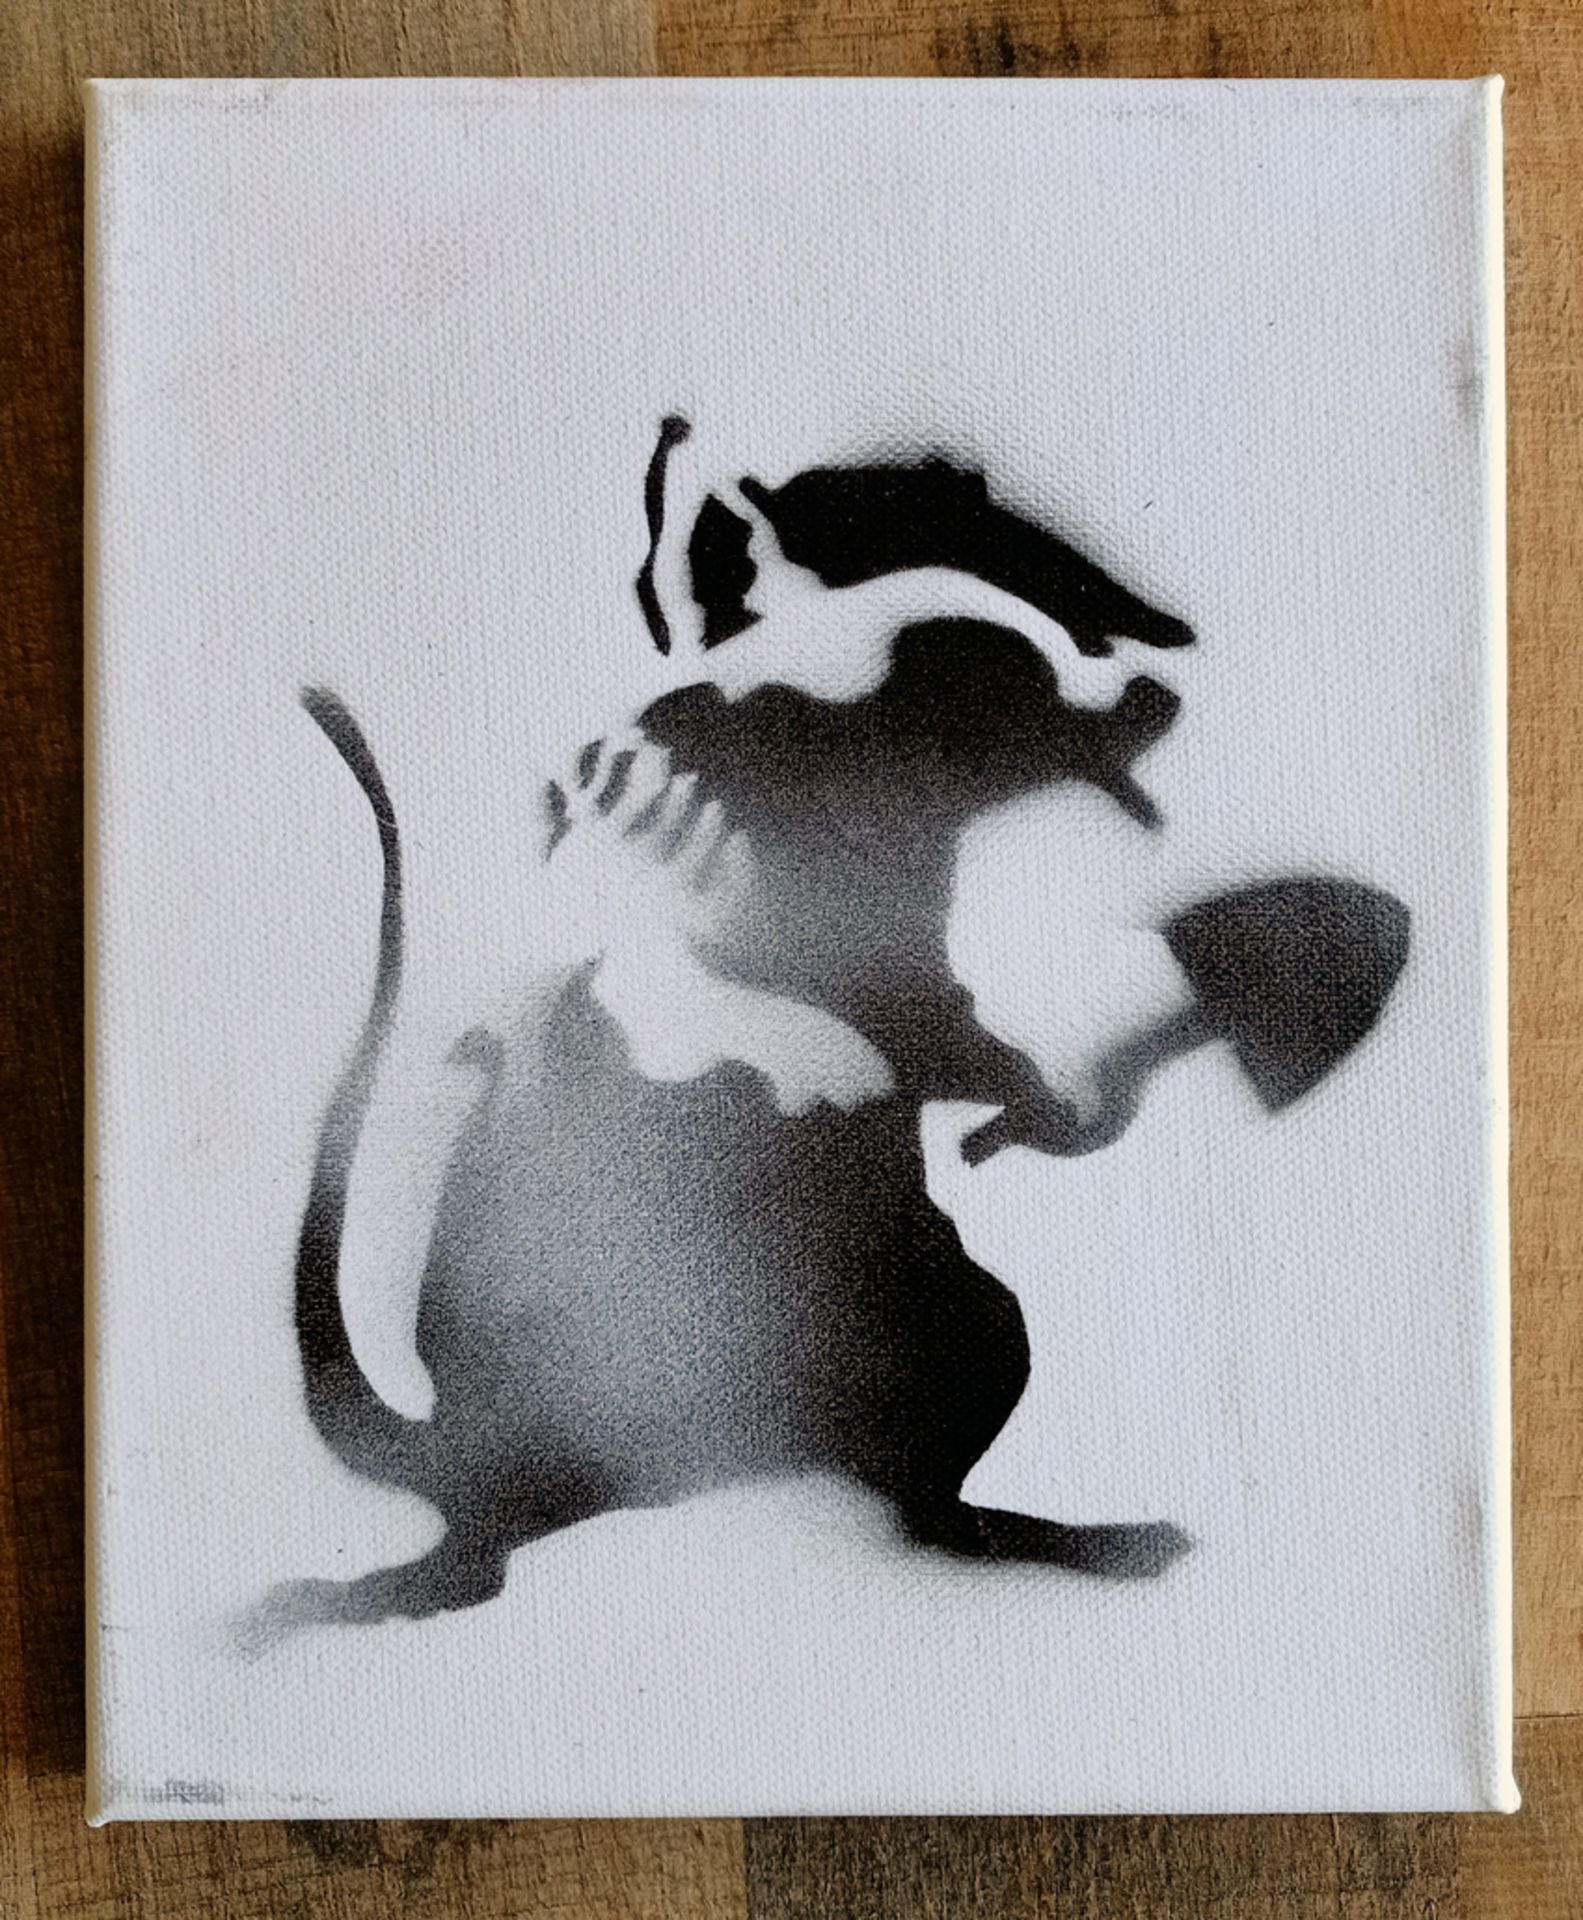 Banksy (Attributed ) WSM Dismaland (Banksy) Street Rat Canvas w/Ticket, Letter and Envelope. (#0593)